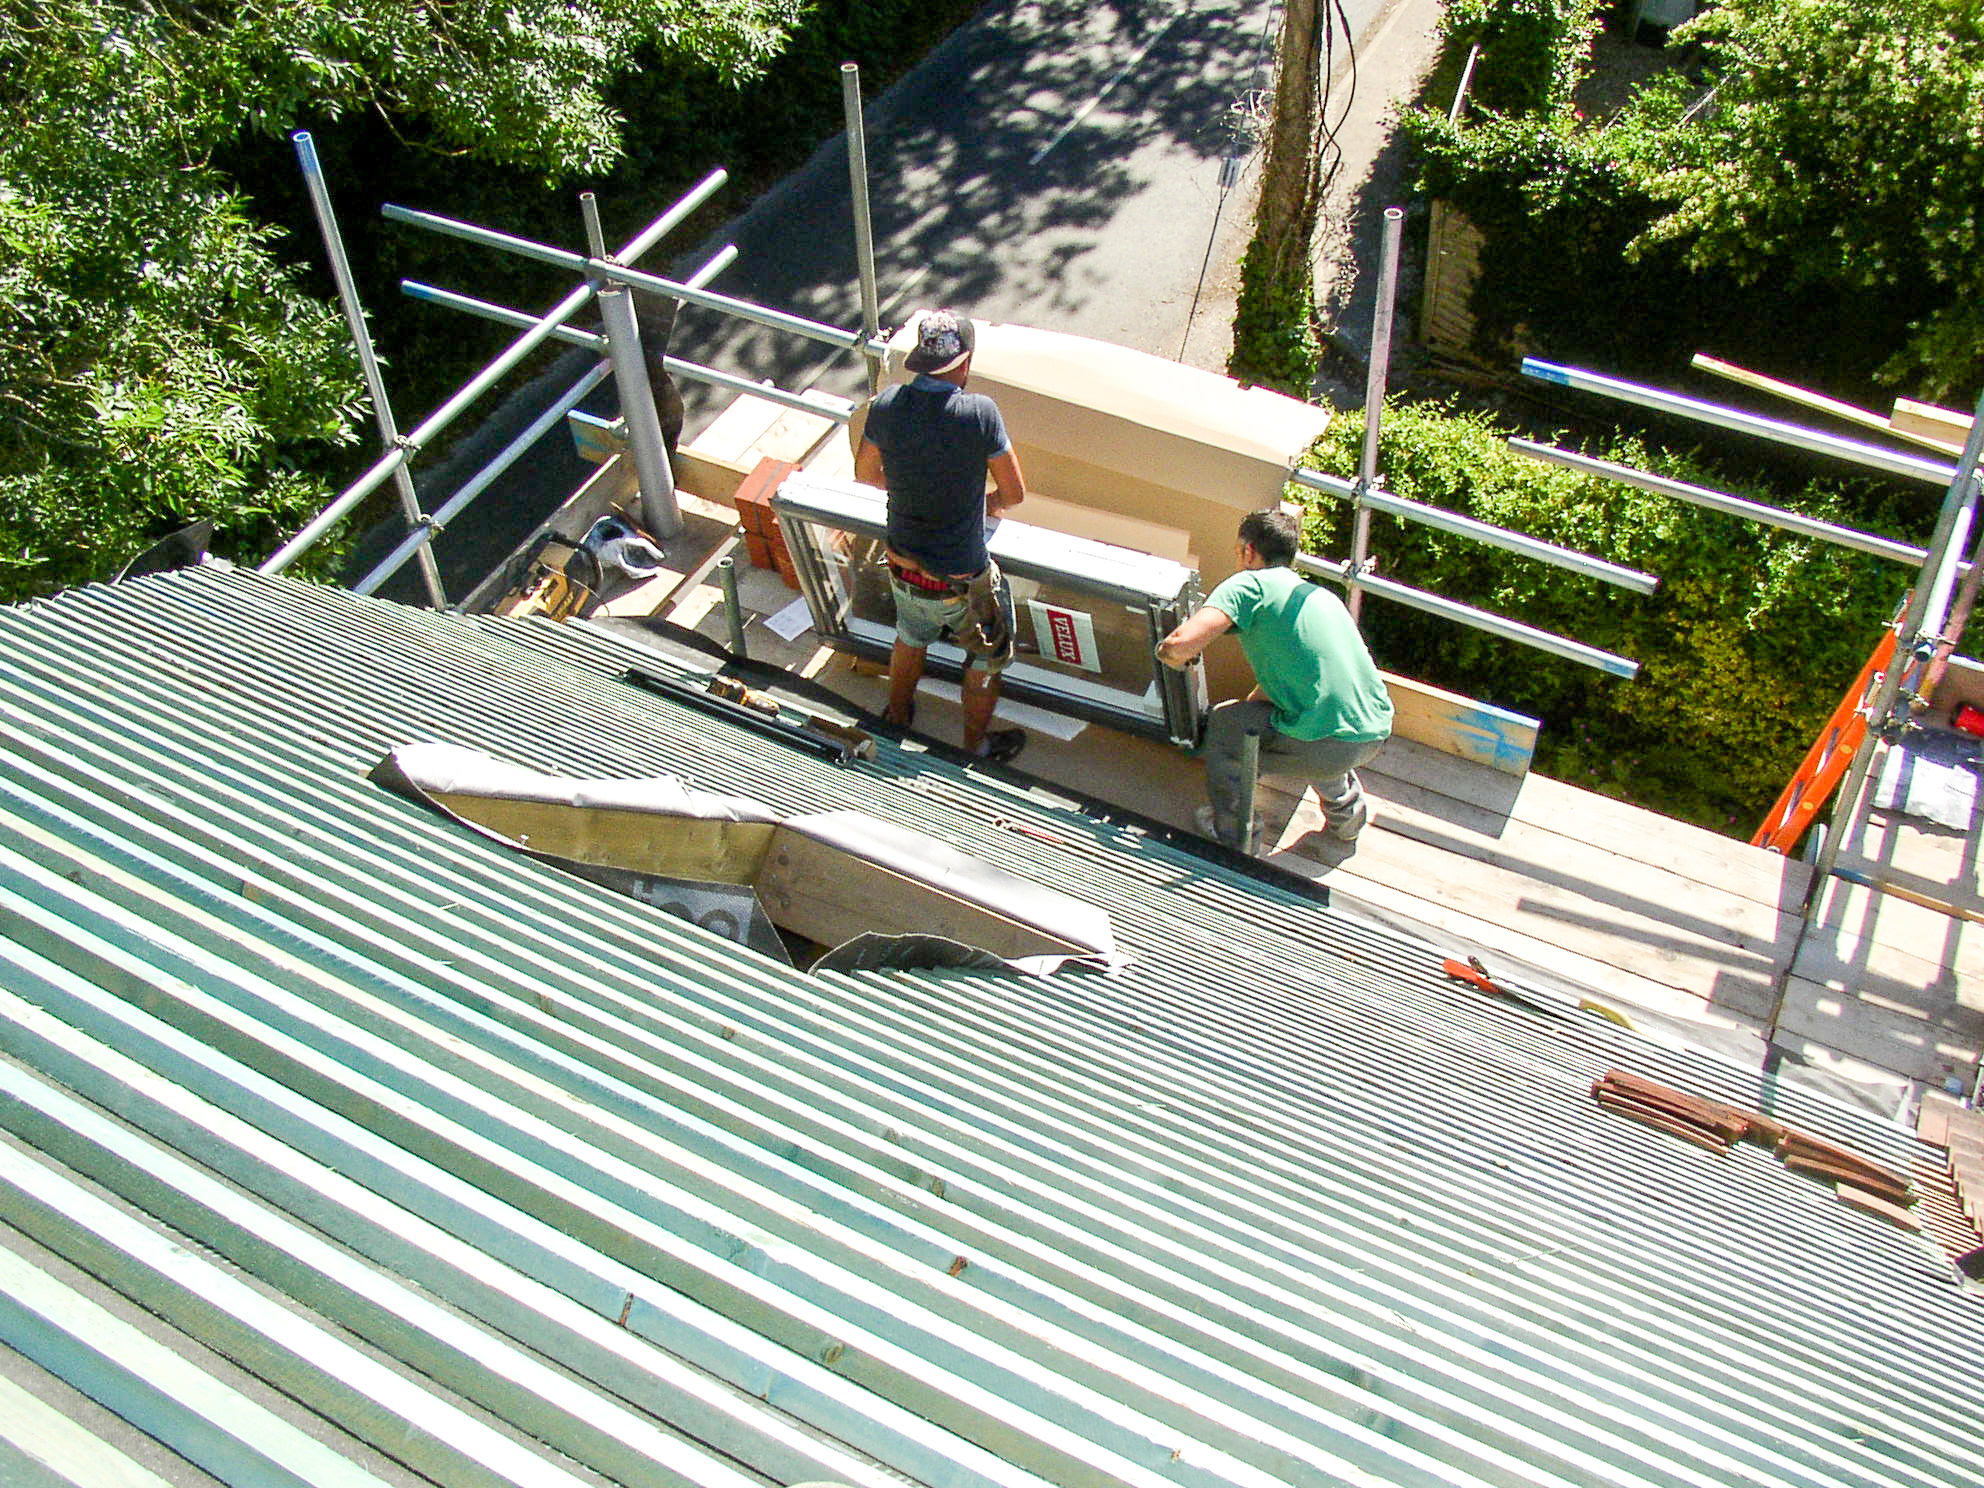 Adding solar panels to a roof